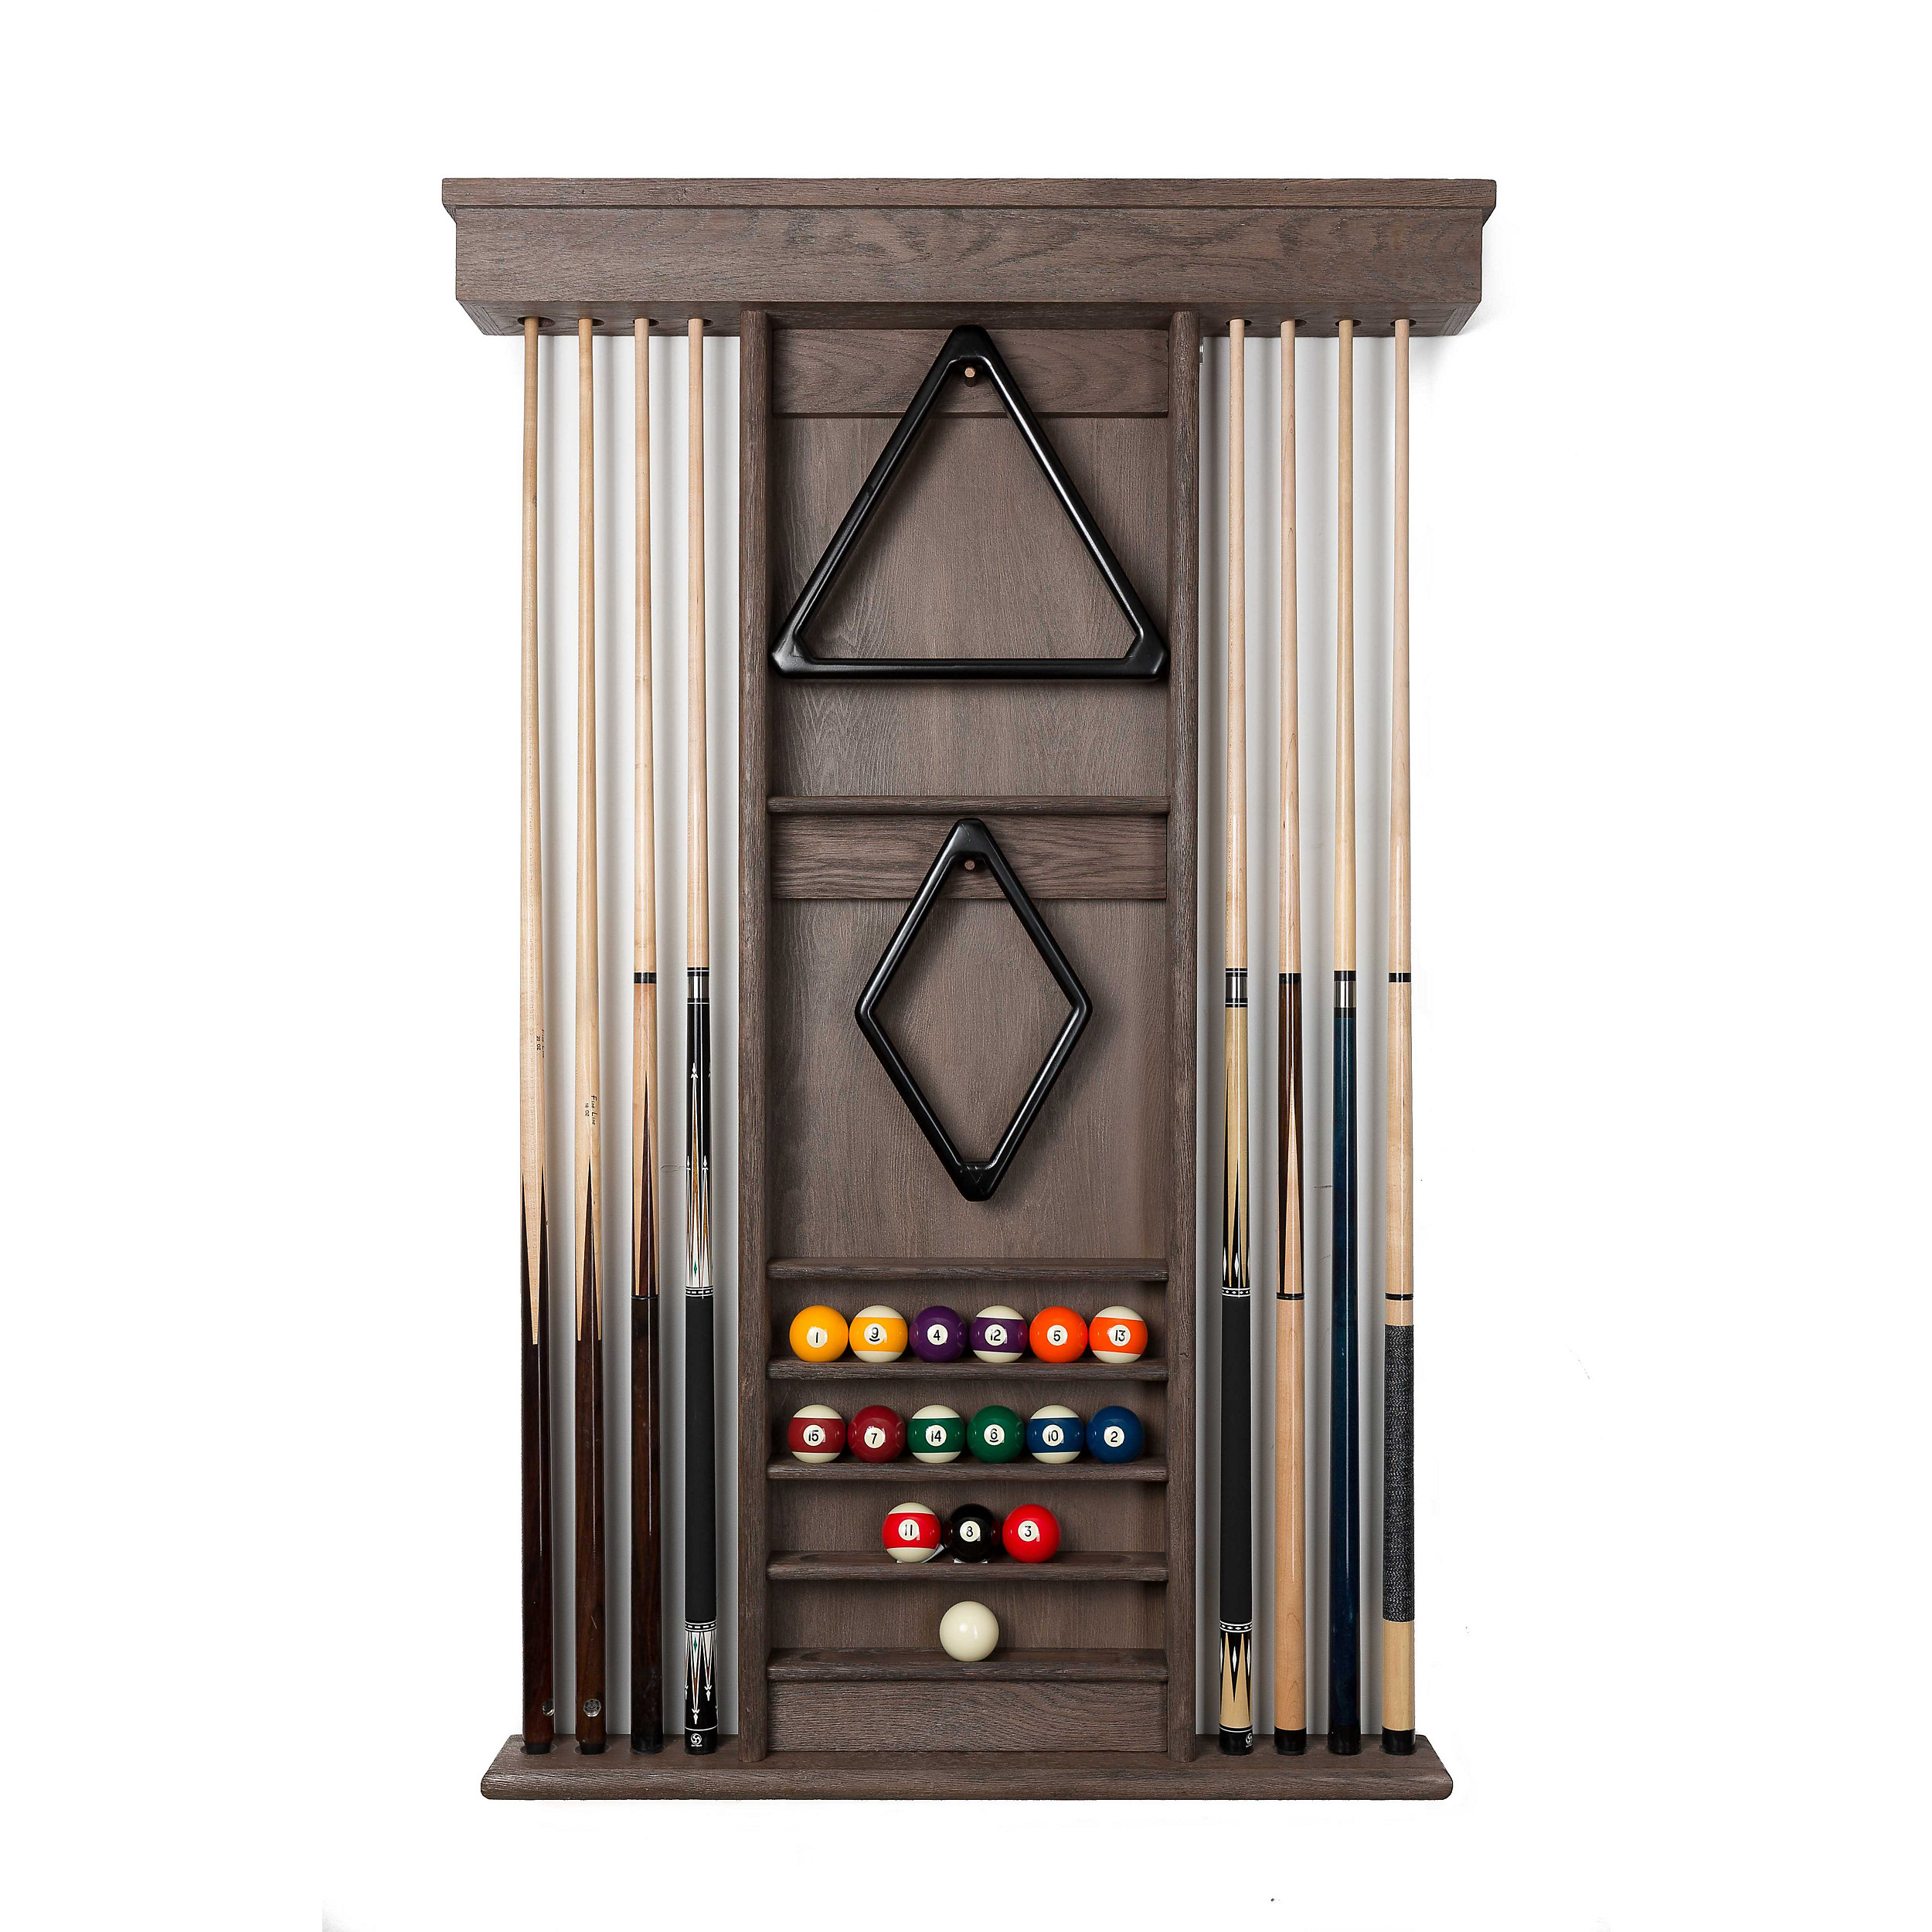 Billiard Cue Sticks Wall Rack 3 Colors Available 6 Cue Wall Mounted Rack 